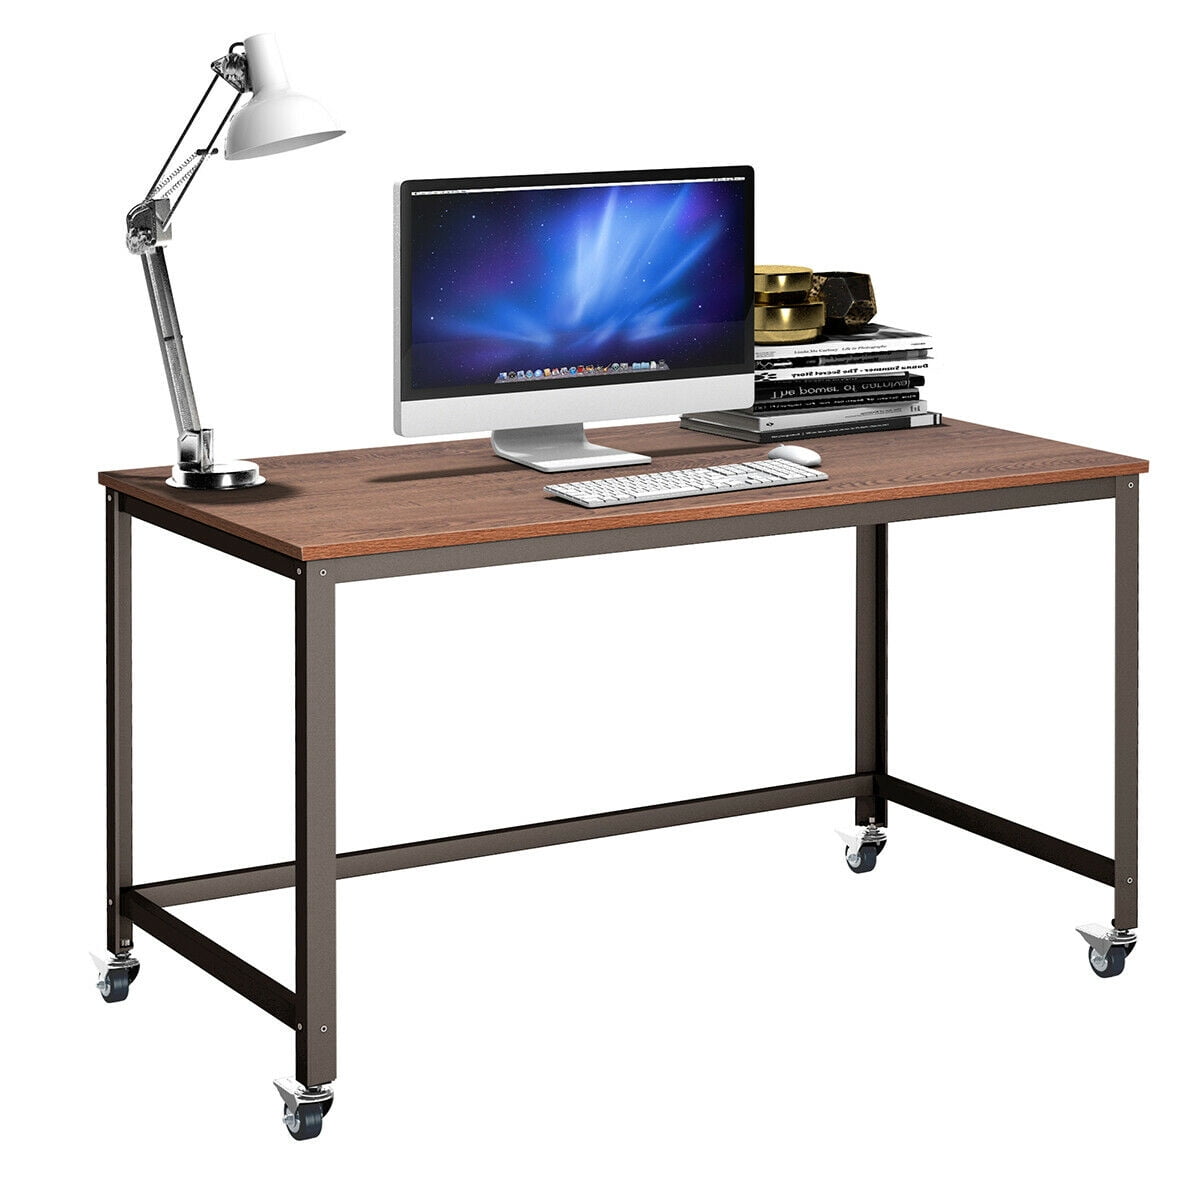 NEW Computer Desk PC Laptop Table Wood Workstation Study Home Office Furniture 